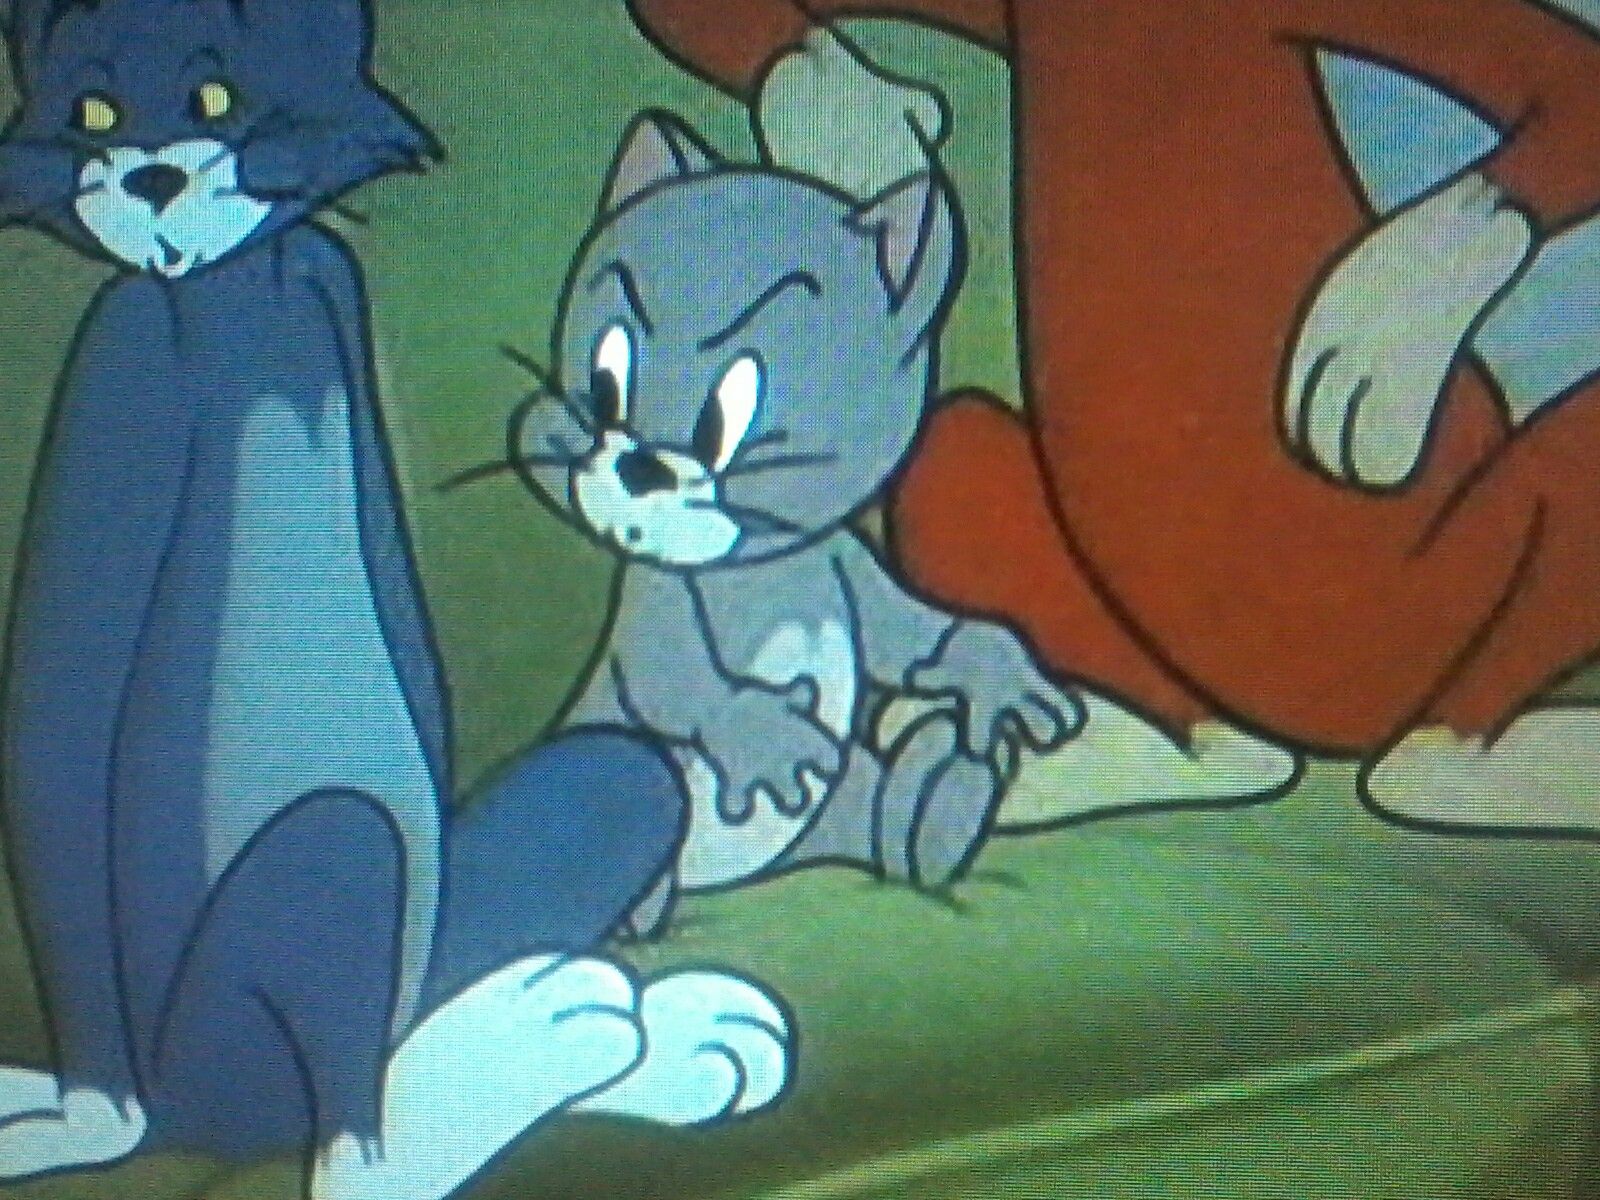 Tom And Jerry The Topsy Cat Angry. Cartoon profile pics, Tom and jerry, Cute wallpaper